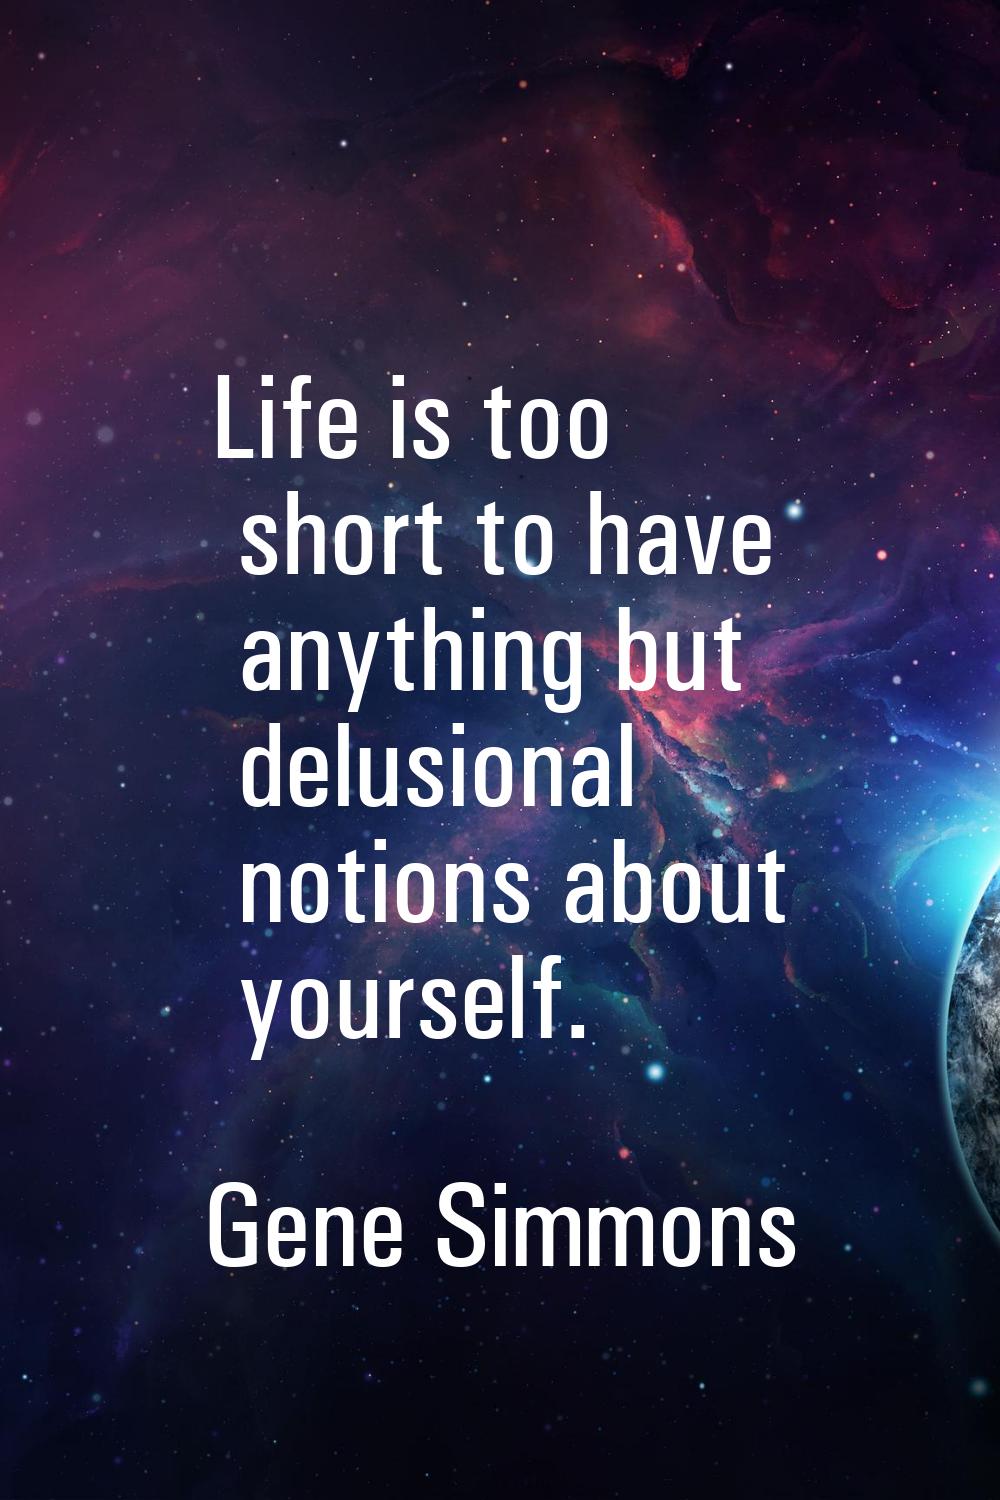 Life is too short to have anything but delusional notions about yourself.